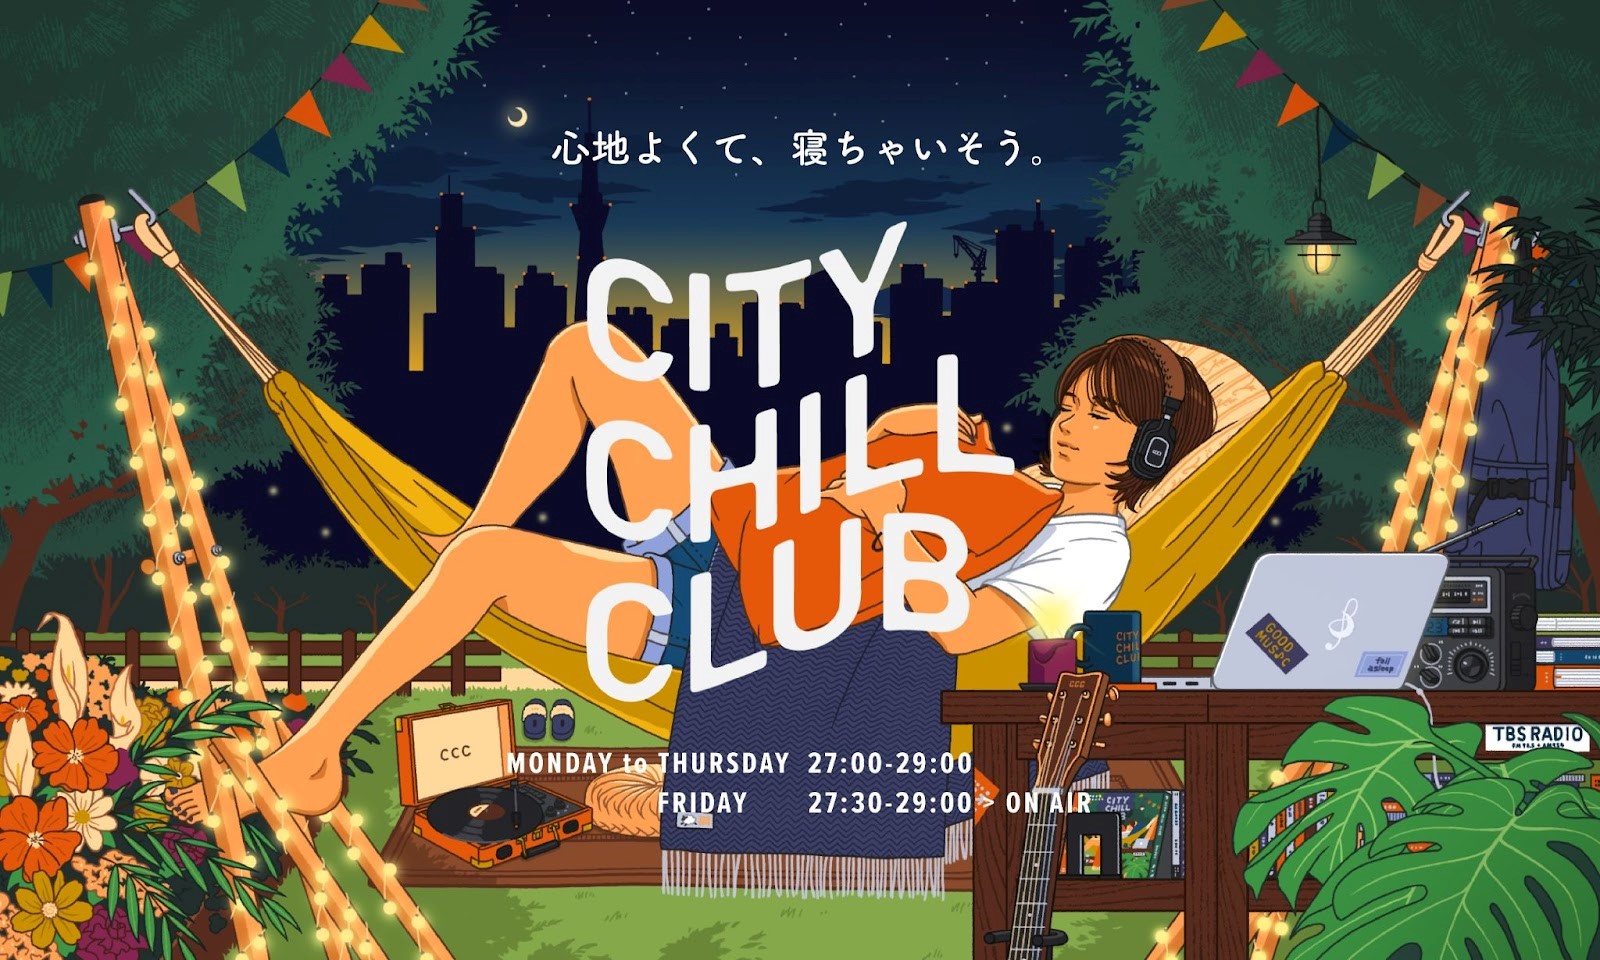 『CITY CHILL CLUB』番組初ライブイベント『Link to_ in hmc studio organized by CITY CHILL CLUB』5/21(火)チケット抽選受付開始！のサブ画像1